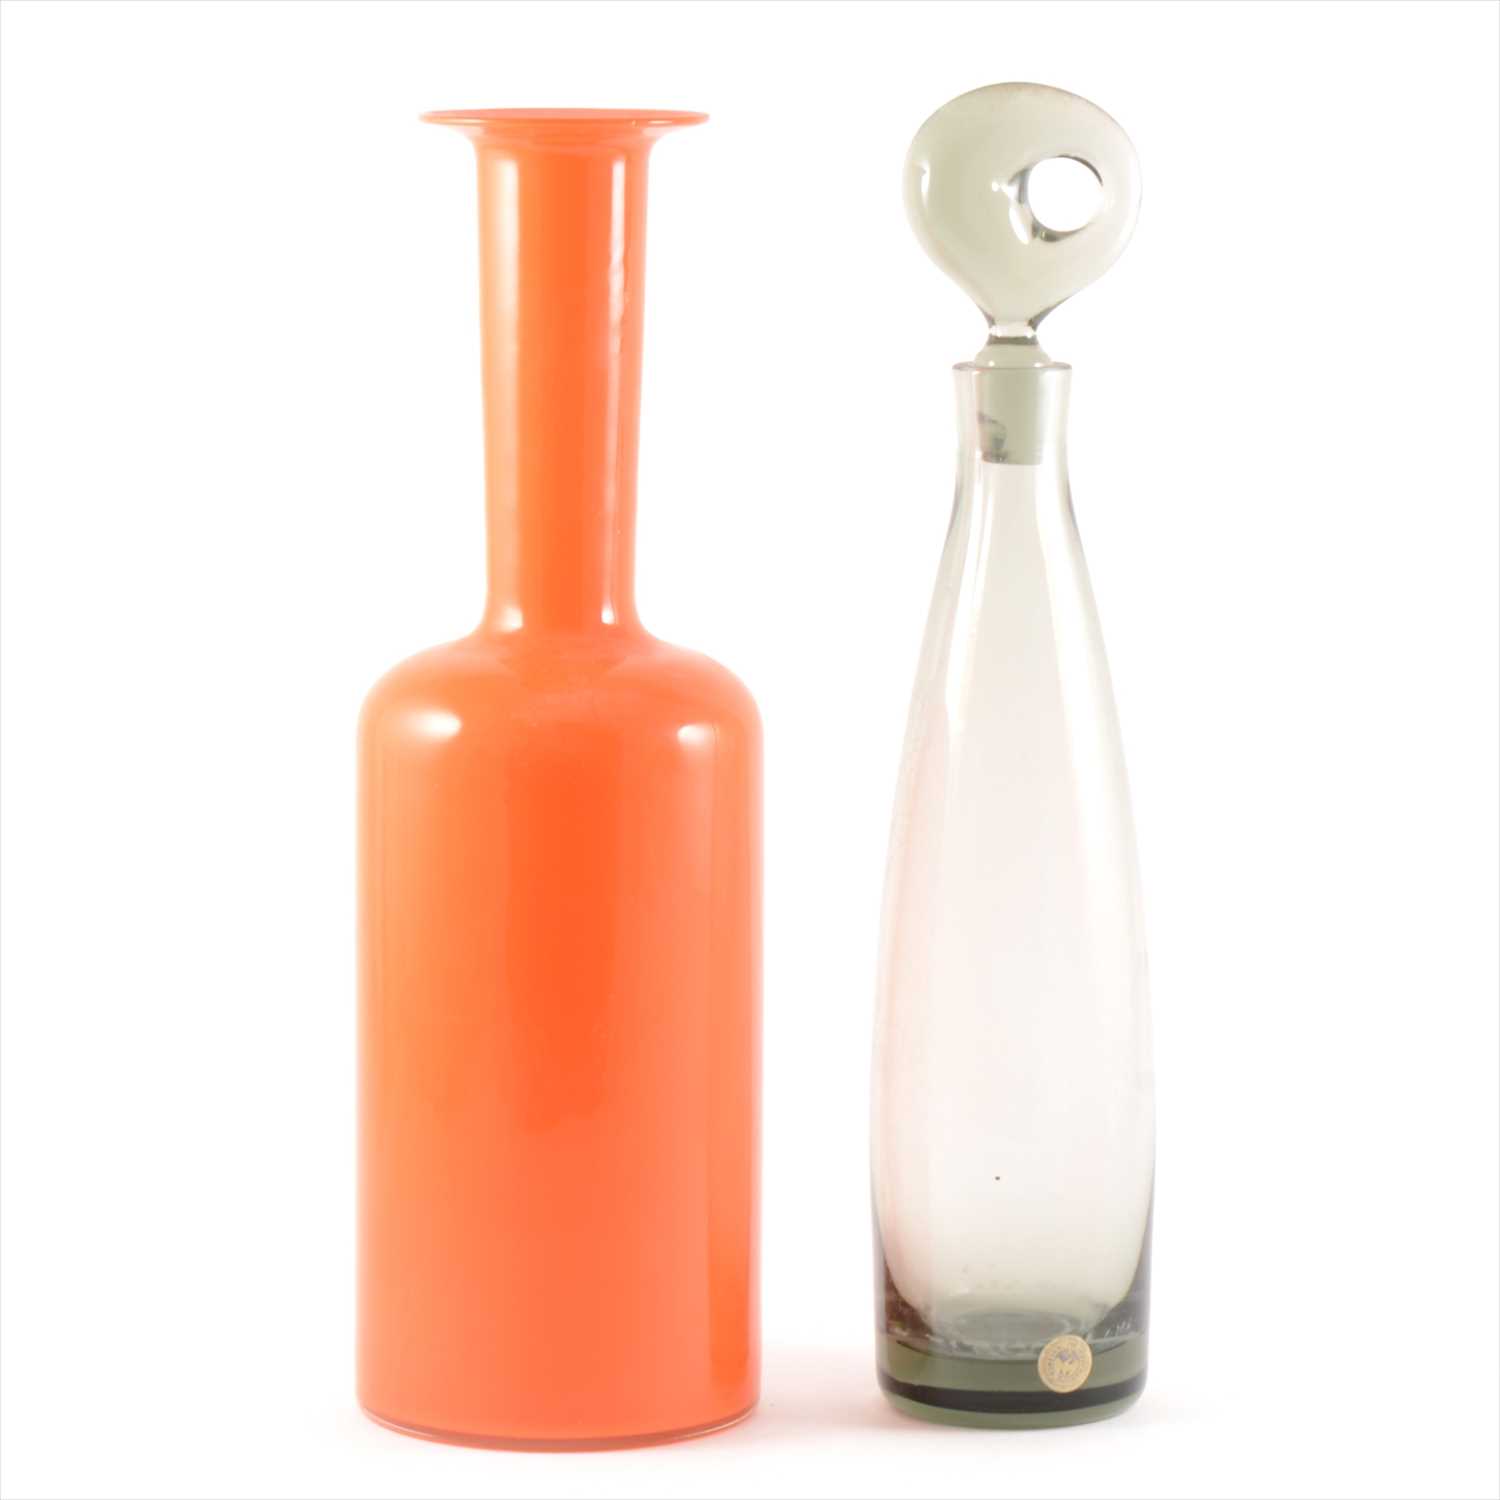 Lot 1 - An 'Aristokrat' tinted glass decanter, by Per Lutken for Holmegaard; and another bottle vase after a design by Otto Brauer